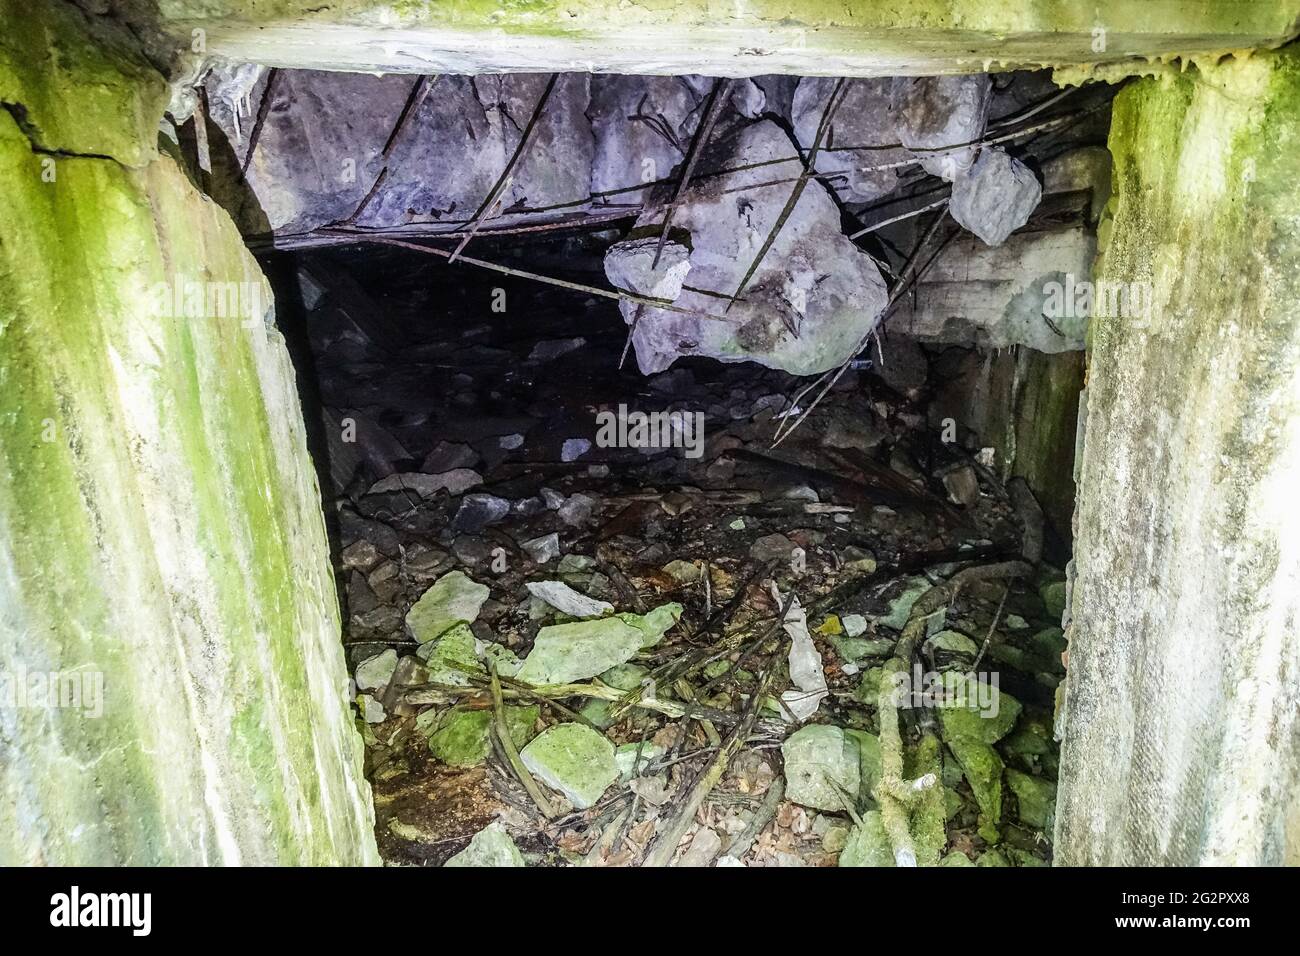 Gierloz, Poland 2nd, June 2021 People visiting the WWII era Adolf Hitler's quarters hidden in a forest near Gierloz, Poland, are seen on 3 June 2021 r Wolf's Lair (ger. Wolfsschanze) ruins of Adolf Hilter's war headquarters was a hidden town in the woods consisting of 200 buildings: shelters, barracks, 2 airports, a power station, a railway station, air-conditioners, water supplies, heat-generating plants and two teleprinters Credit: Vadim Pacajev/Alamy Live News Stock Photo